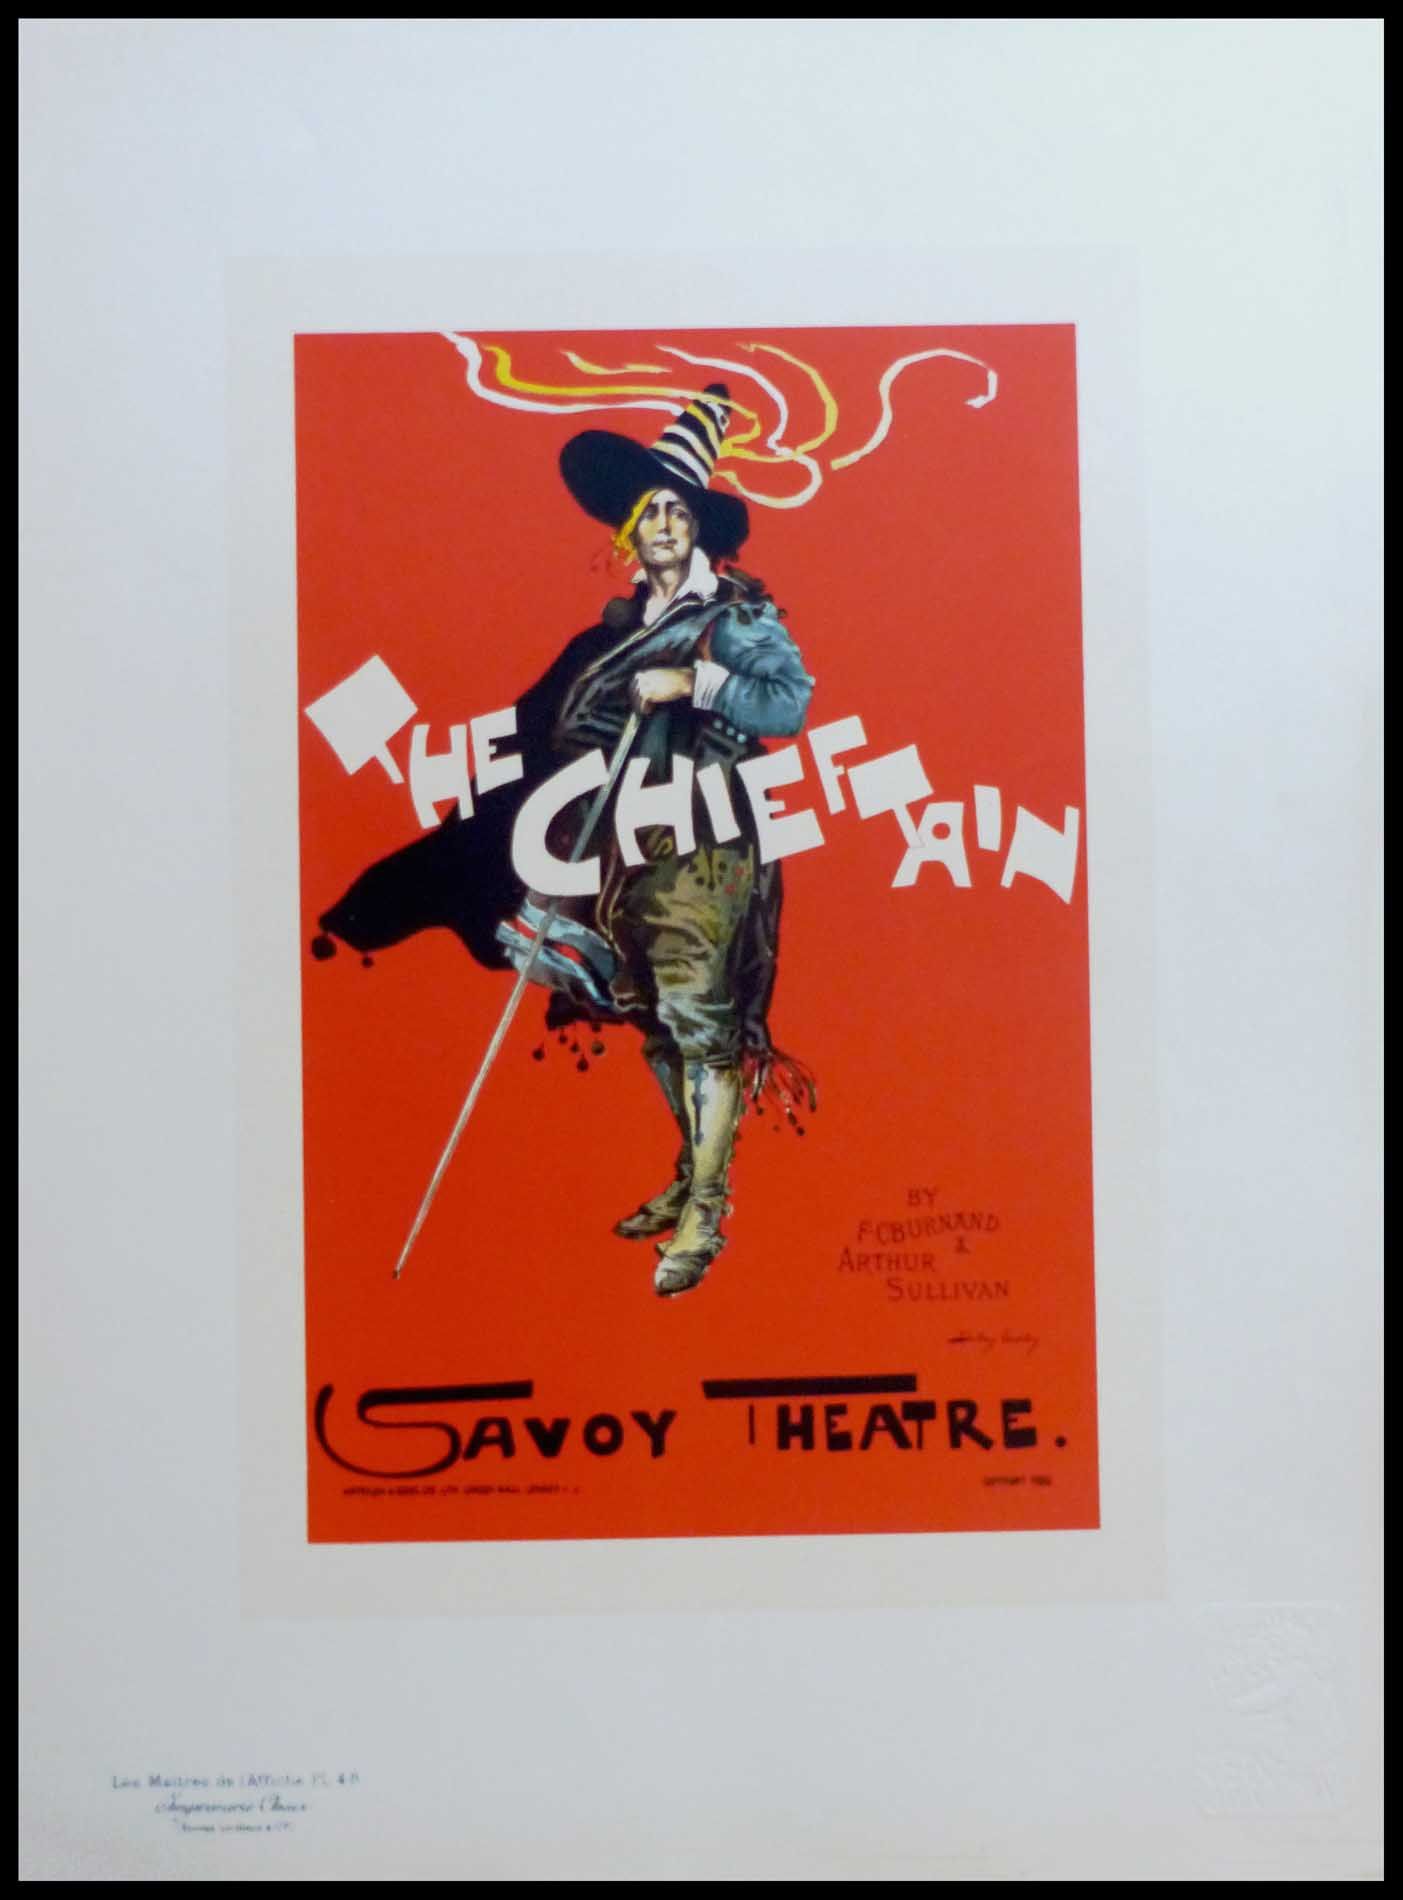 Dudley Hardy Dudley HARDY: (1867 - 1922) The Chieftain Savoy Theater 1896 Origin&hellip;